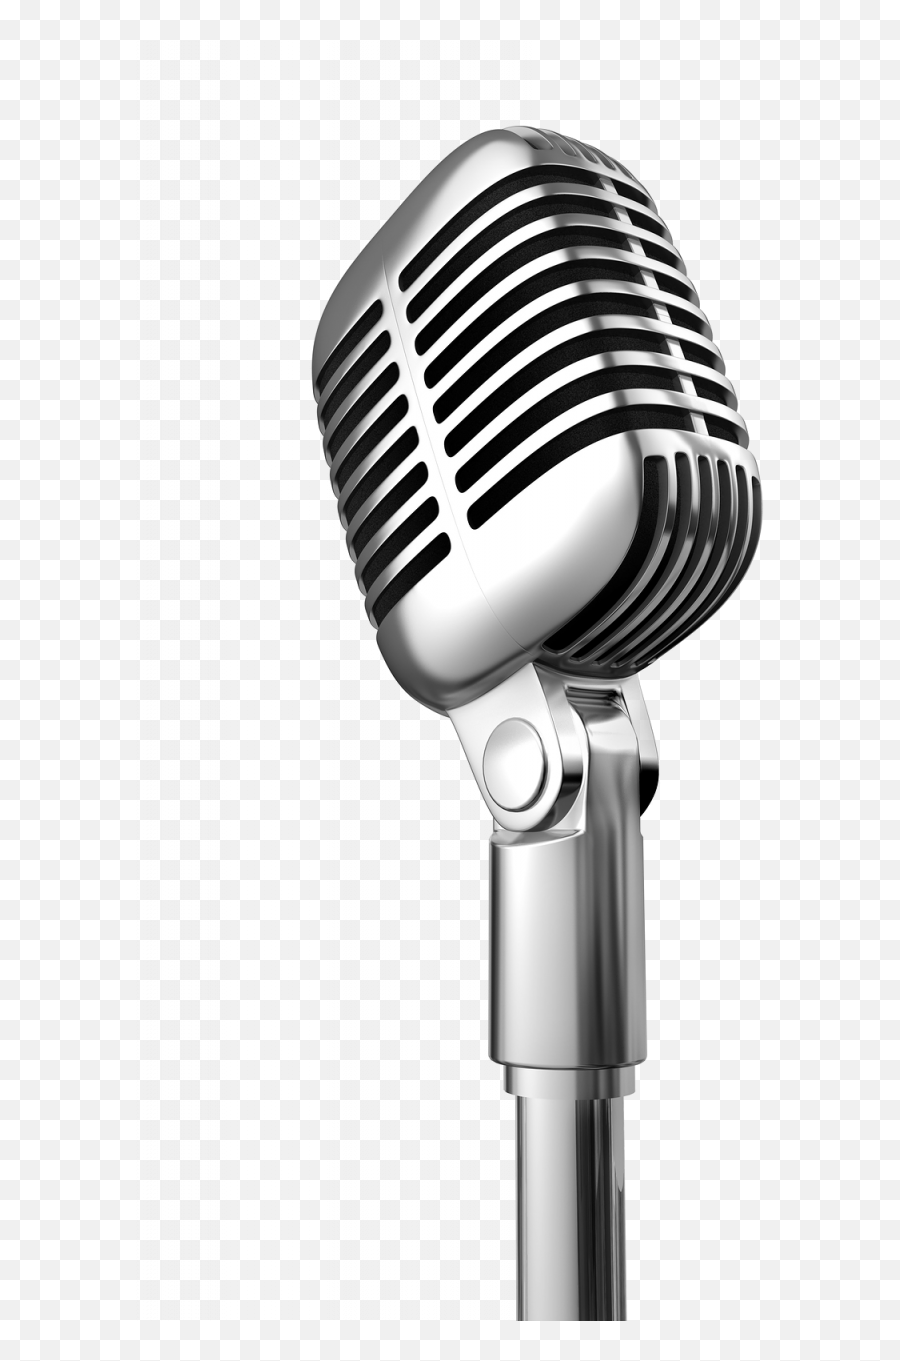 Download Hd Open - Mic Backgrounds Old Microphone Microphone Transparent Background Emoji,Microphone Transparent